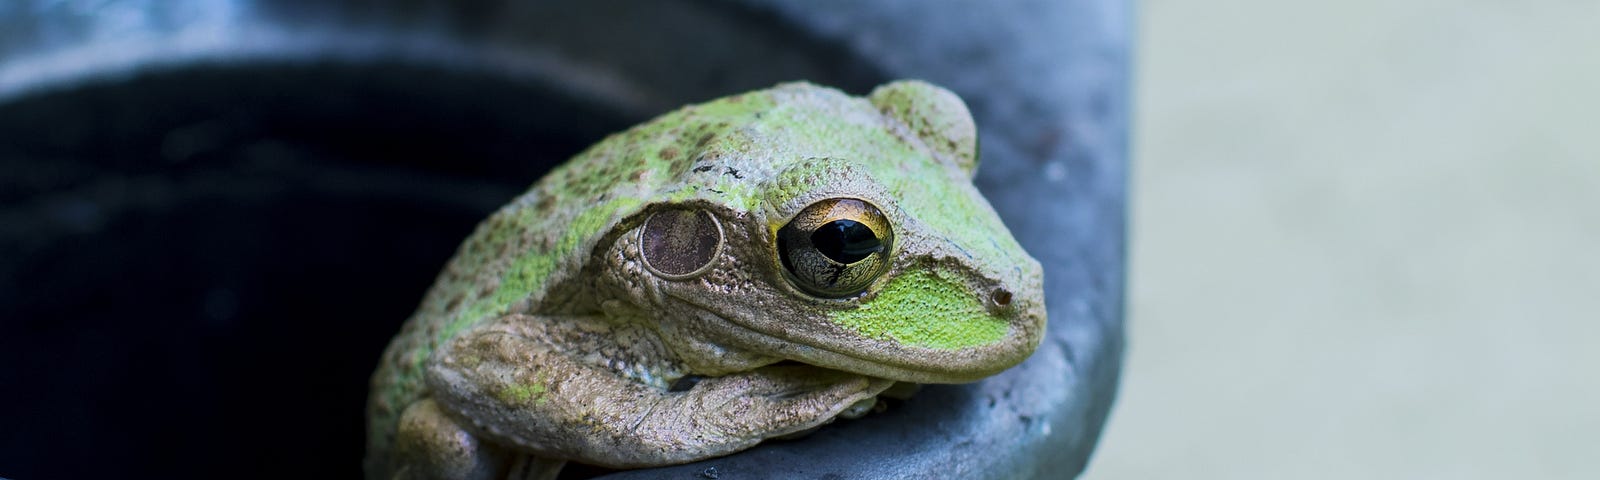 A frog at the edge of a pot.